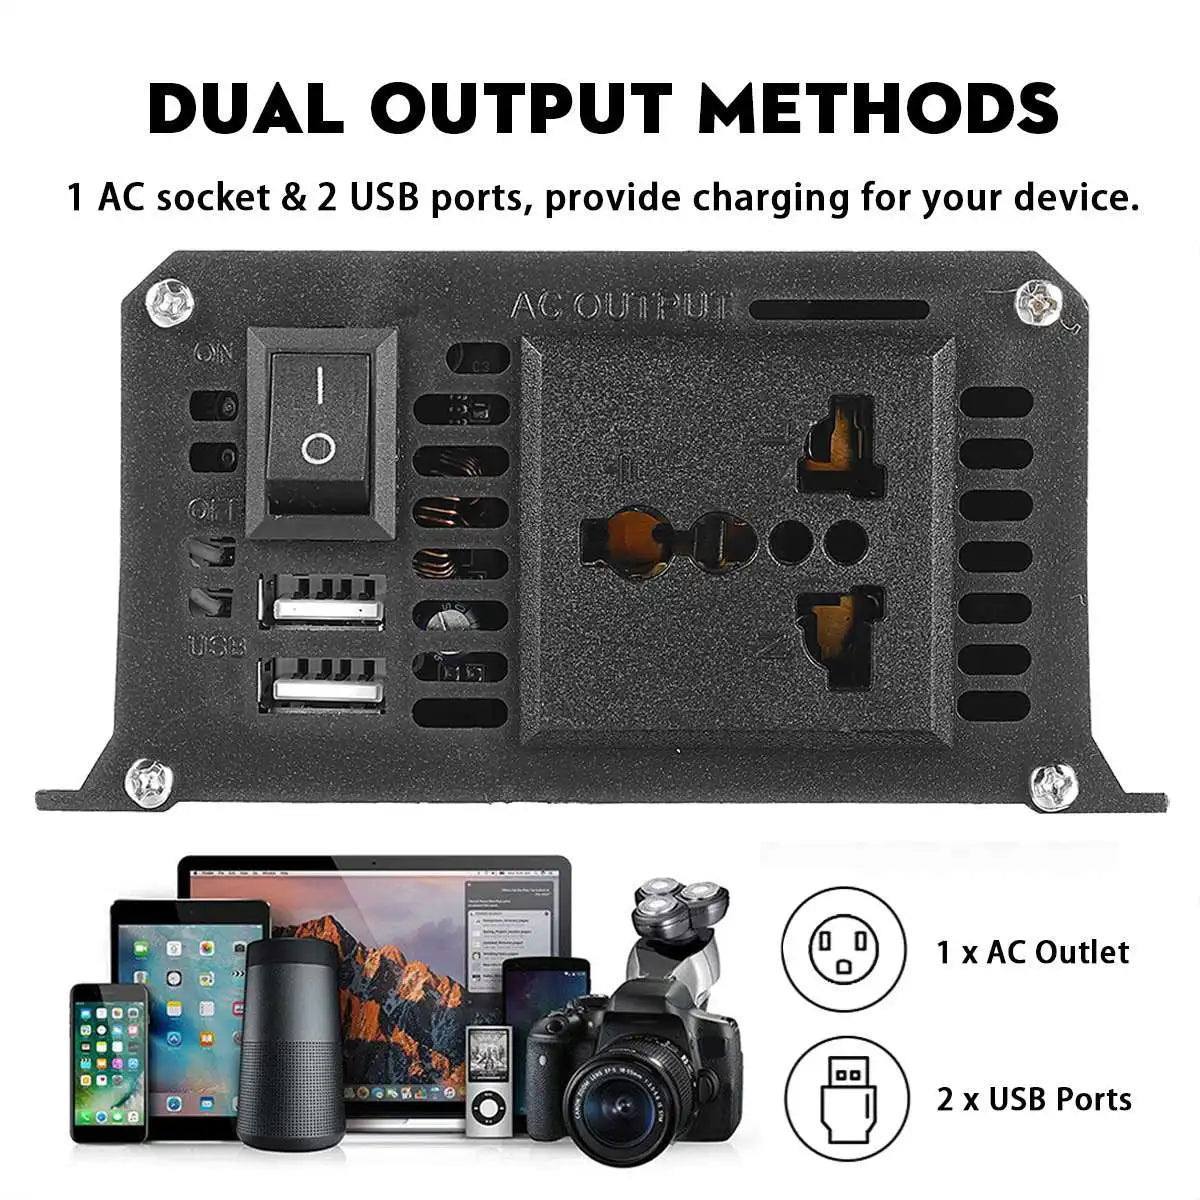 Multiple charging options: AC outlet and two USB ports.